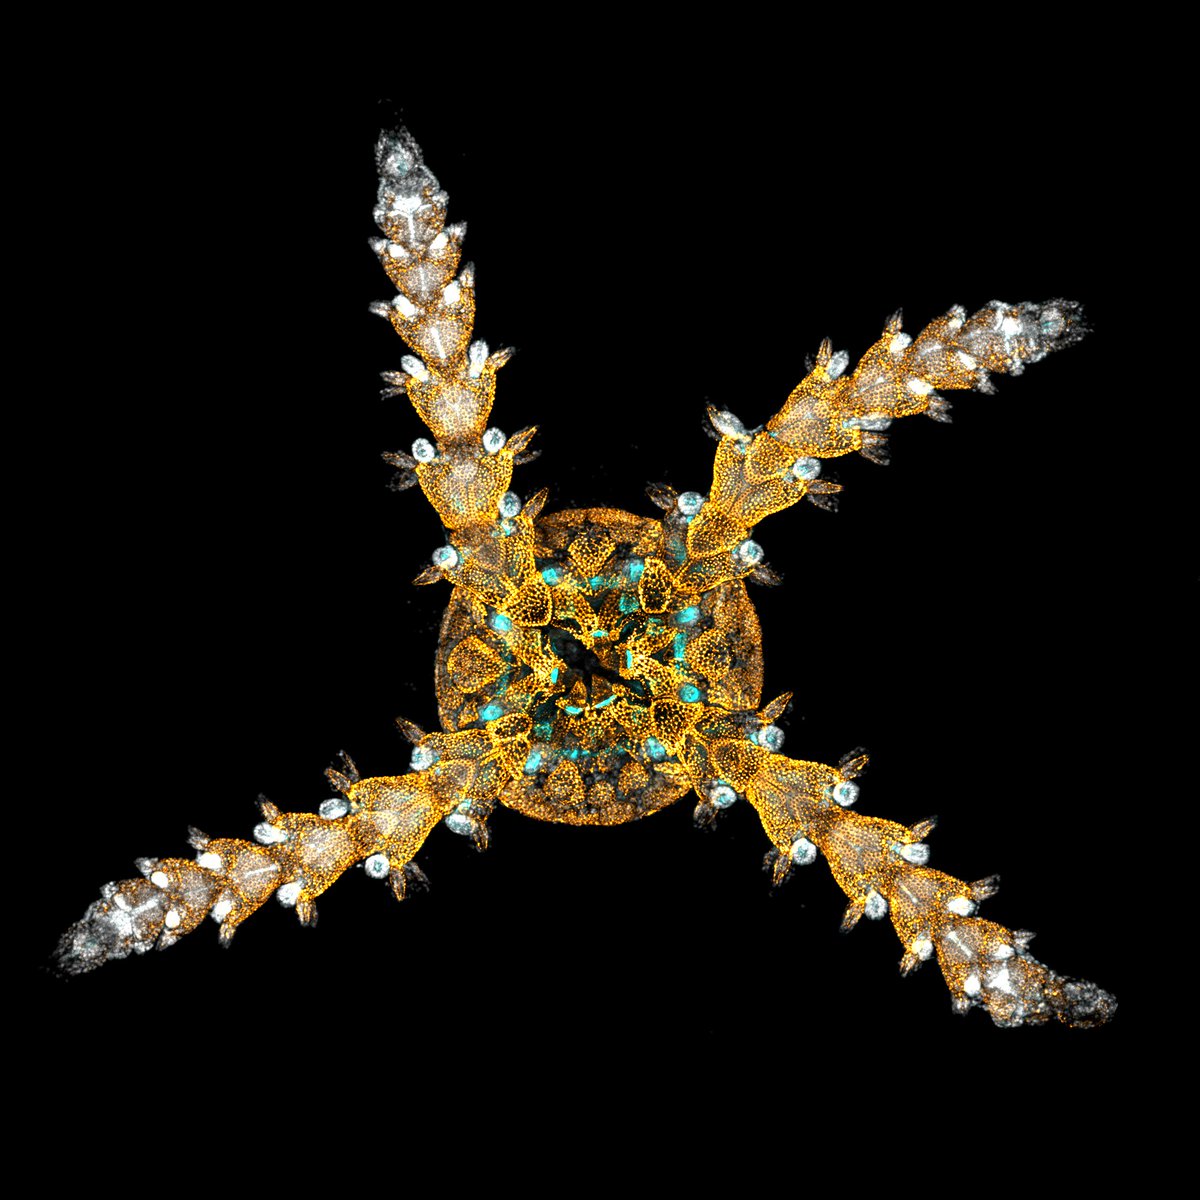 4-armed brittle star🤔⭐️ I have seen many sea stars and sea urchins with 4 rays, but this is my first brittle star. #Echinoderm nerds, are these common in the wild? ⬇️ Amphipholis squamata prenatal juvenile, skeleton (orange) and muscle (cyan) stainings